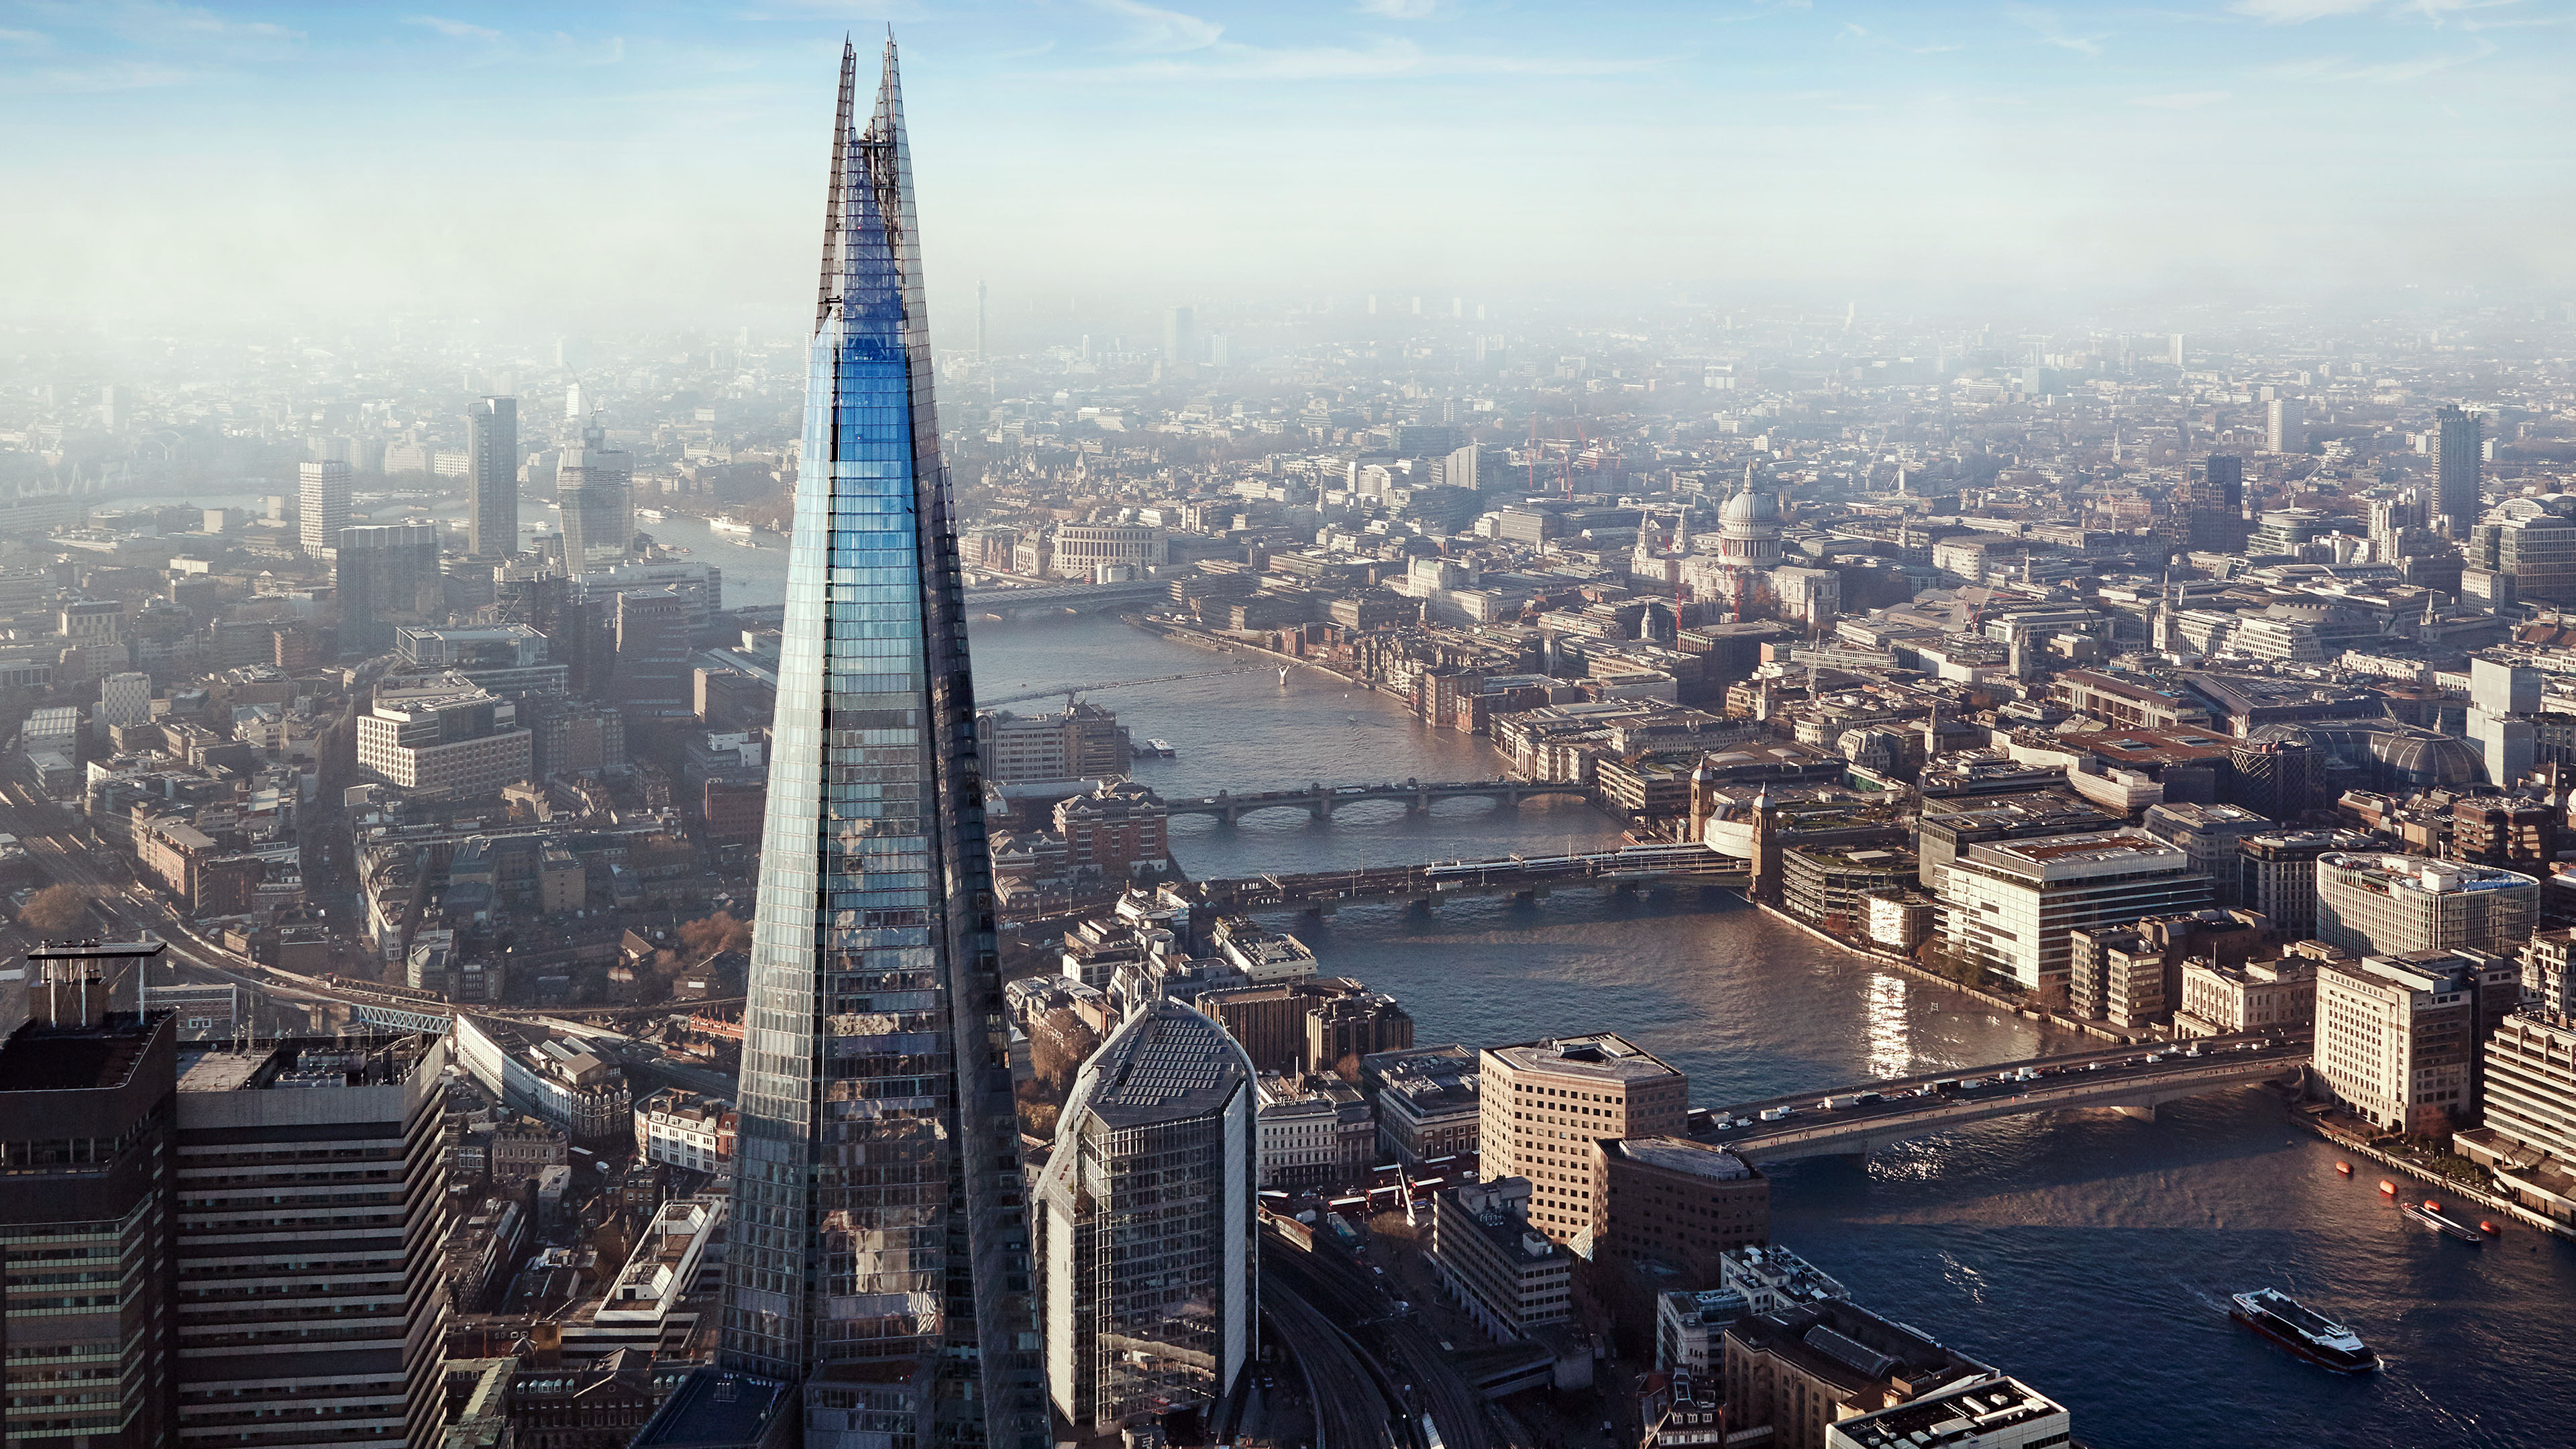 Aerial view of The Shard in the foreground and the Thames and London skyline